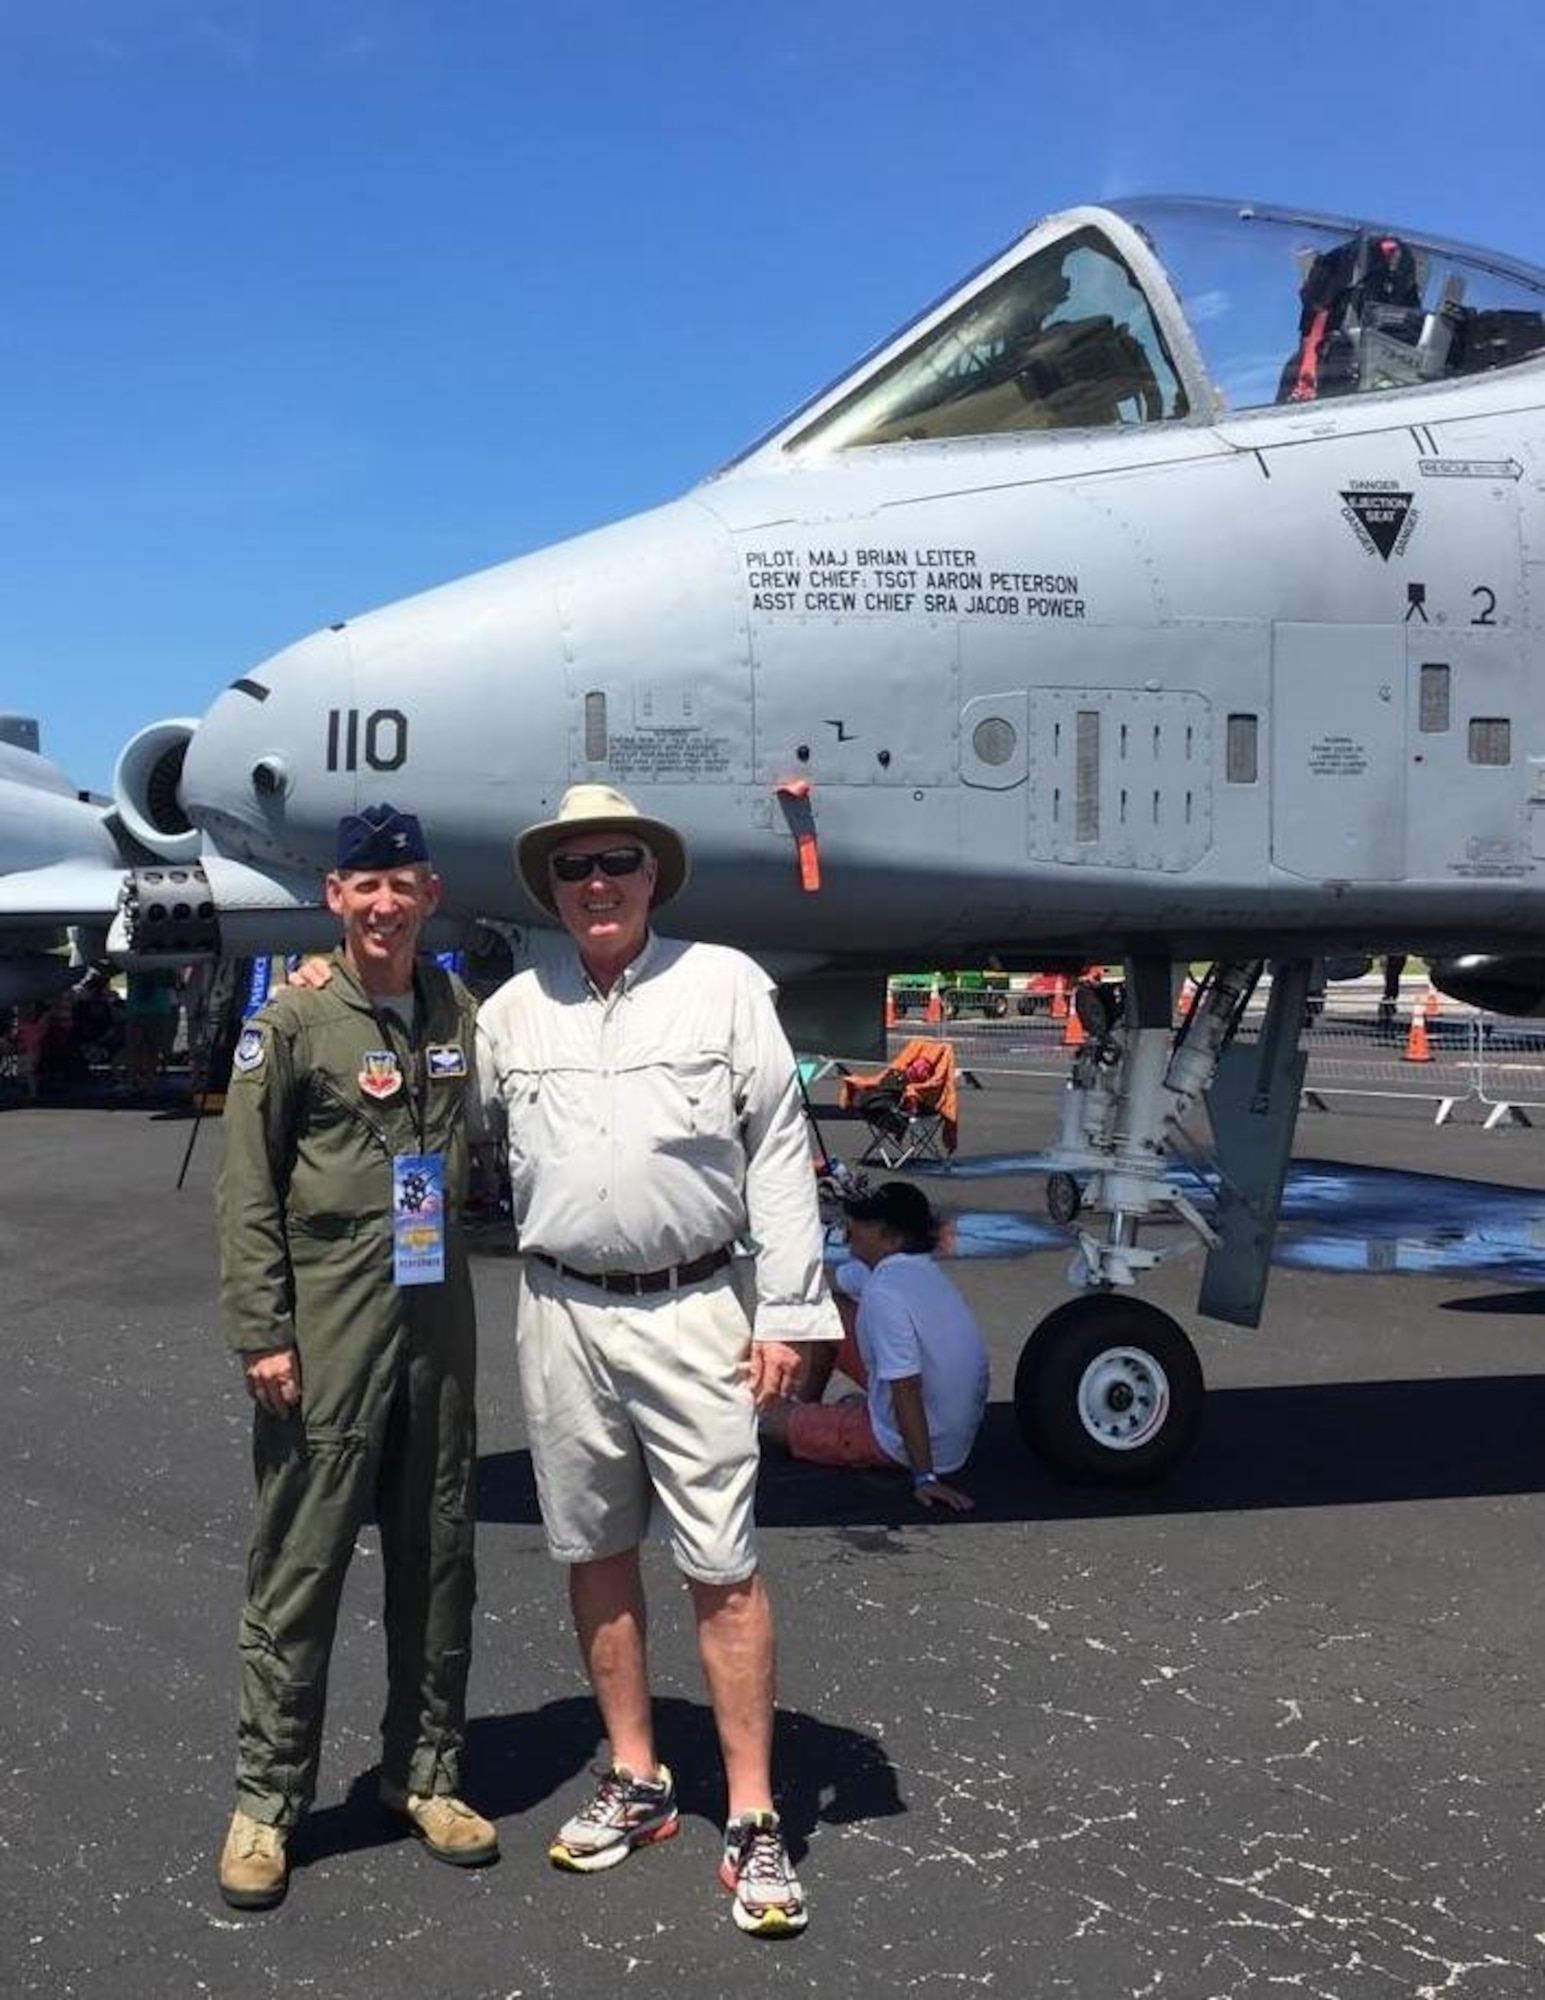 Col. Scott Caine, 9th Air Force vice commander, and his friend George Simon stand next to an A-10 Thunderbolt II at the Vero Beach Air Show, June 25, 2016. Caine, who calls Vero Beach home, had the opportunity to tell community members about the Air Force and thank them for their support. (Courtesy photo)